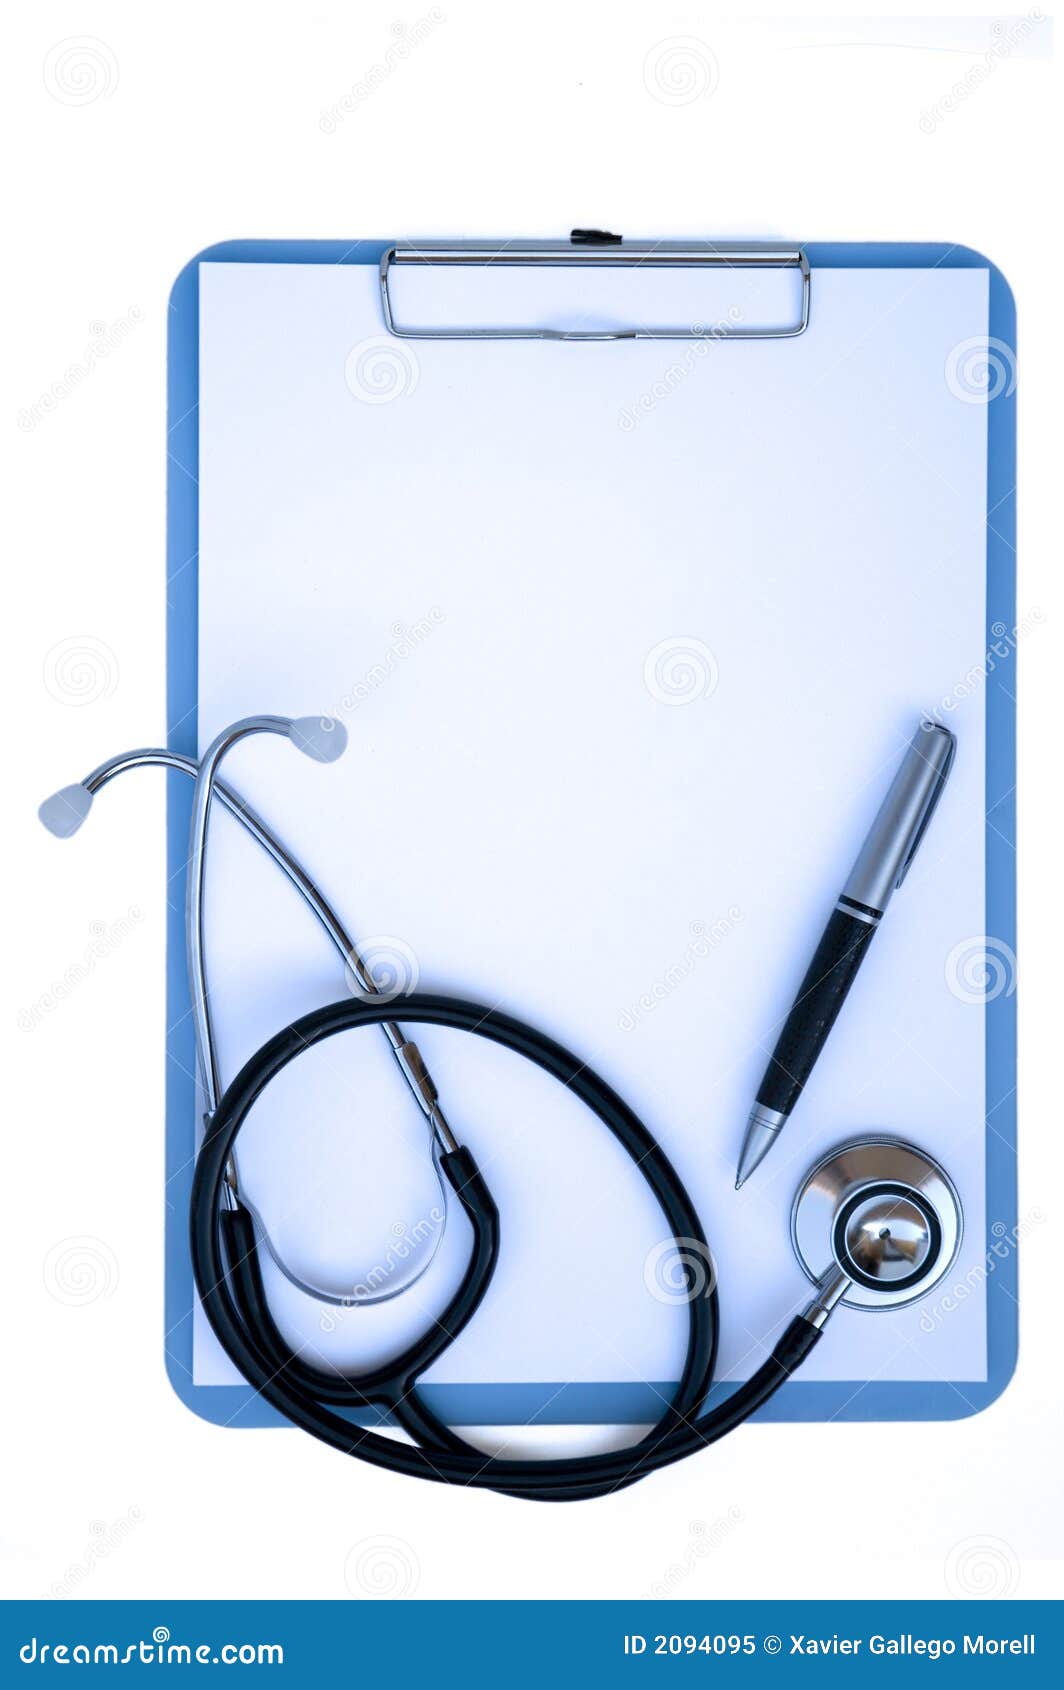 medical clipart collection - photo #27